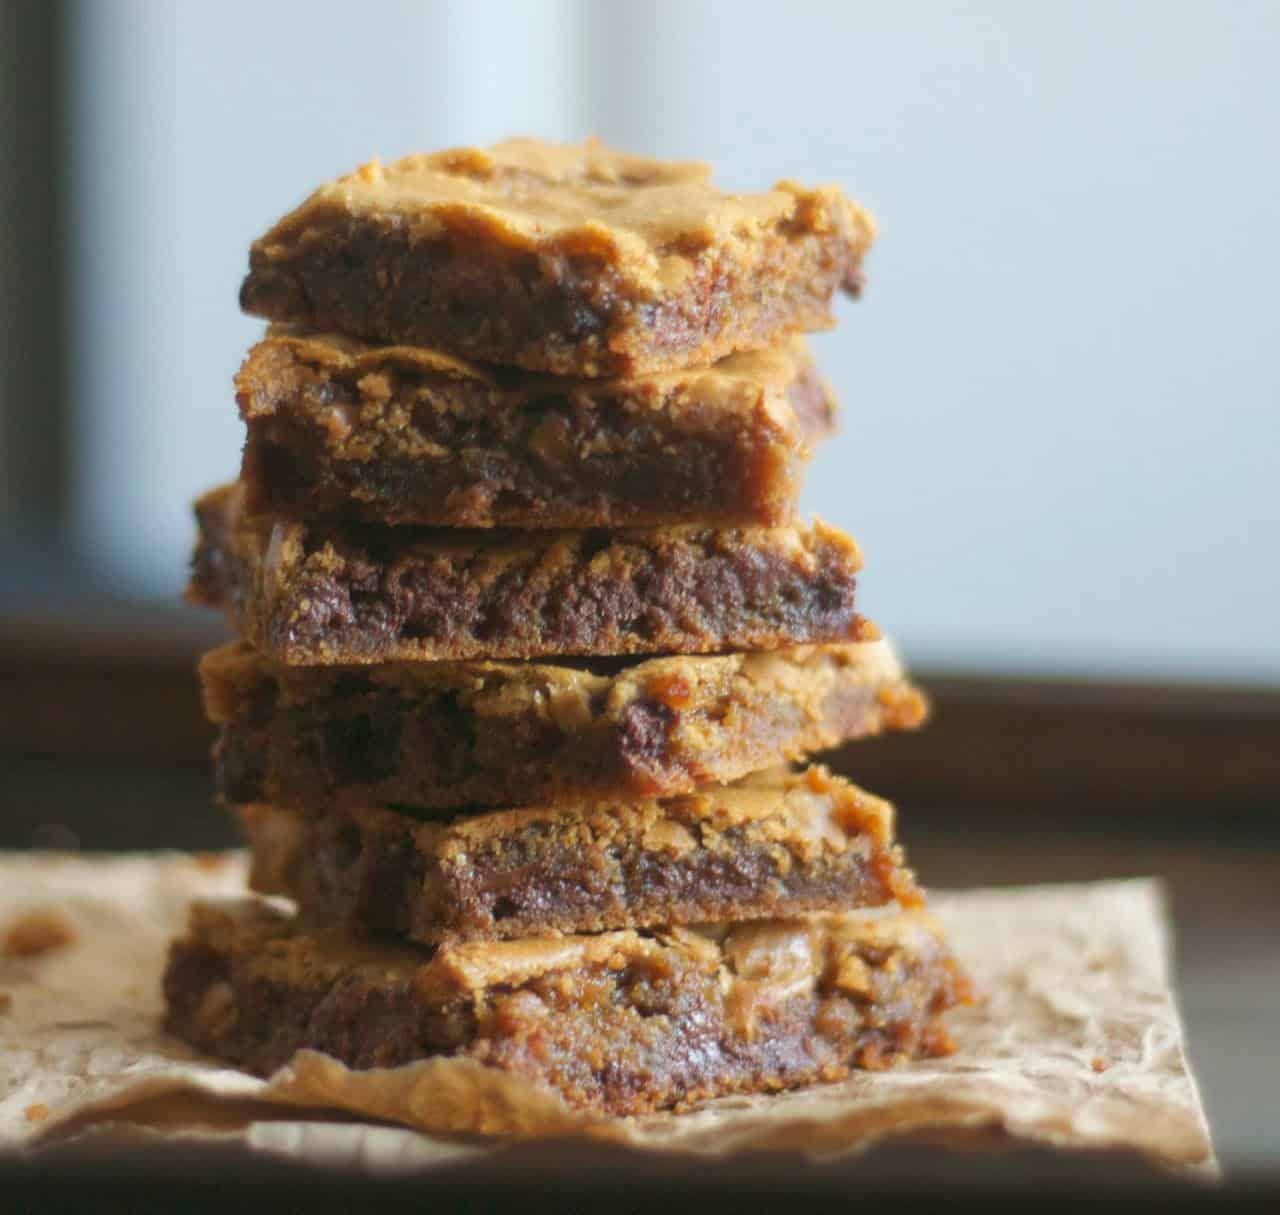 These Butterscotch Chocolate Chip Brownies are ooey, gooey! They're made with dark brown sugar and semi-sweet chocolate chips to make a delicious dessert.